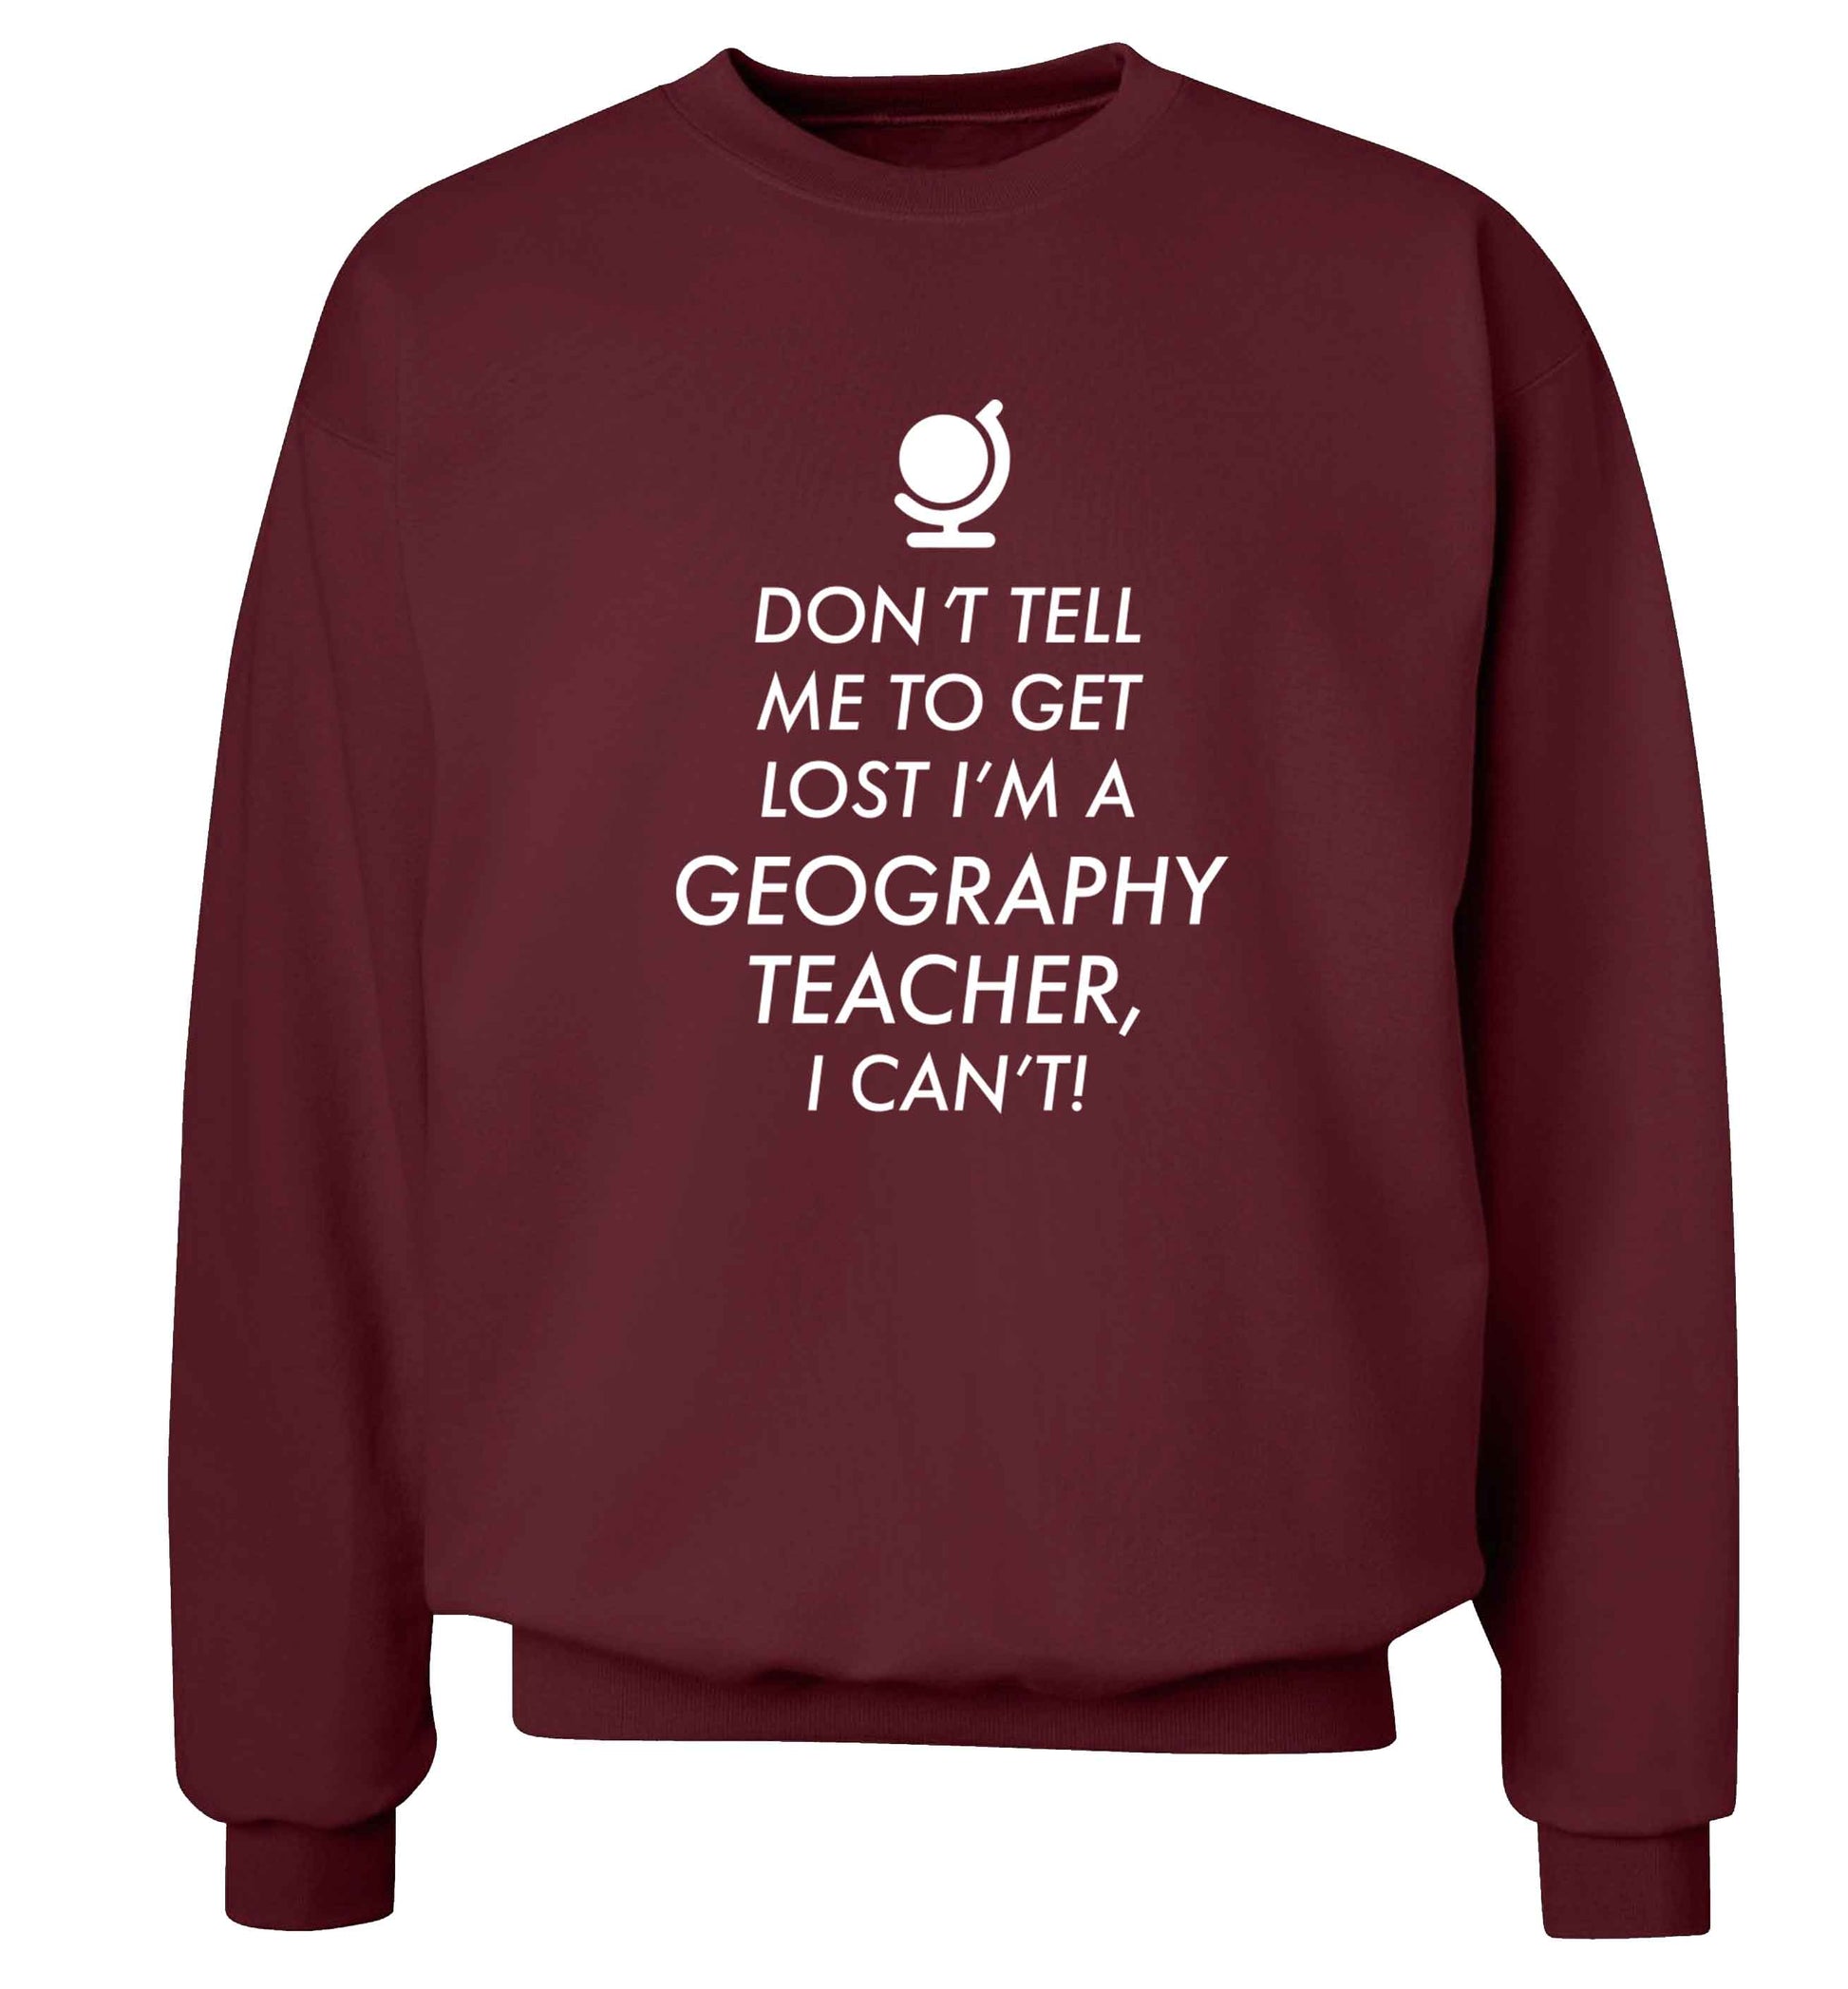 Don't tell me to get lost I'm a geography teacher, I can't Adult's unisex maroon Sweater 2XL